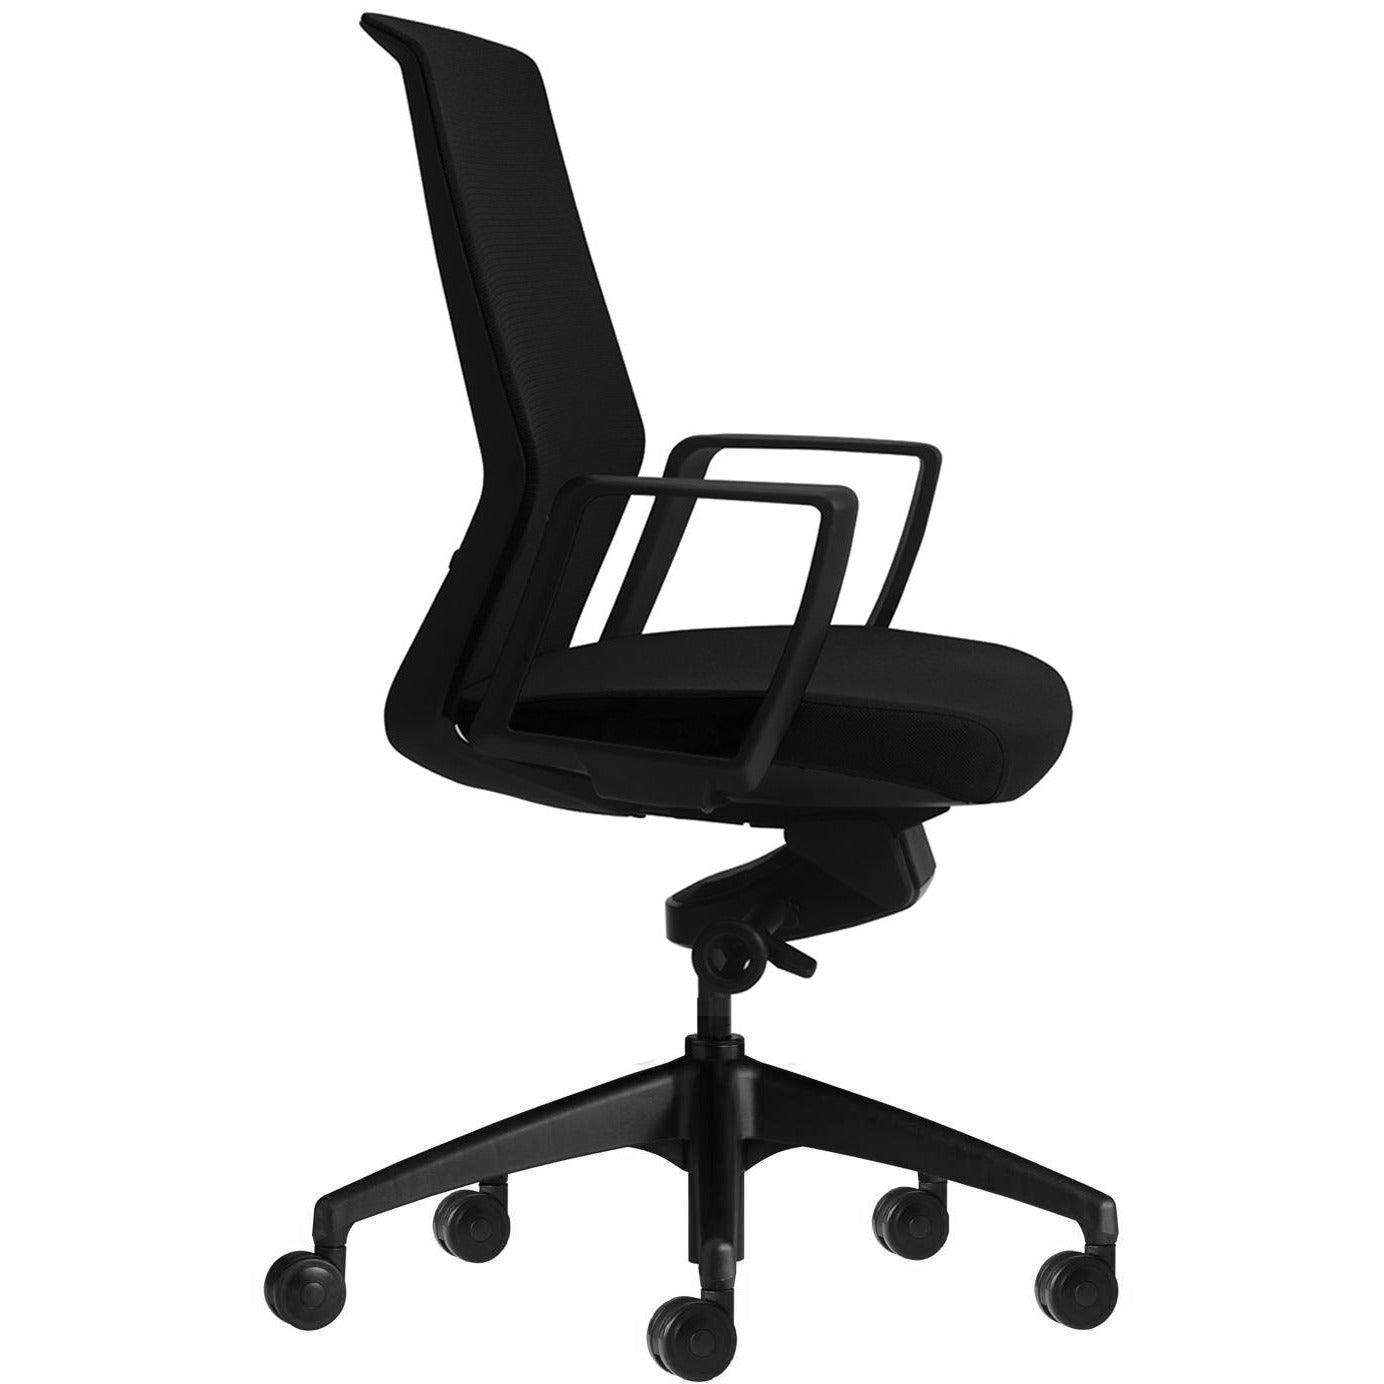 Aveya Black Office Chair with Boost Adjustable Lumbar Support - Office Furniture Company 